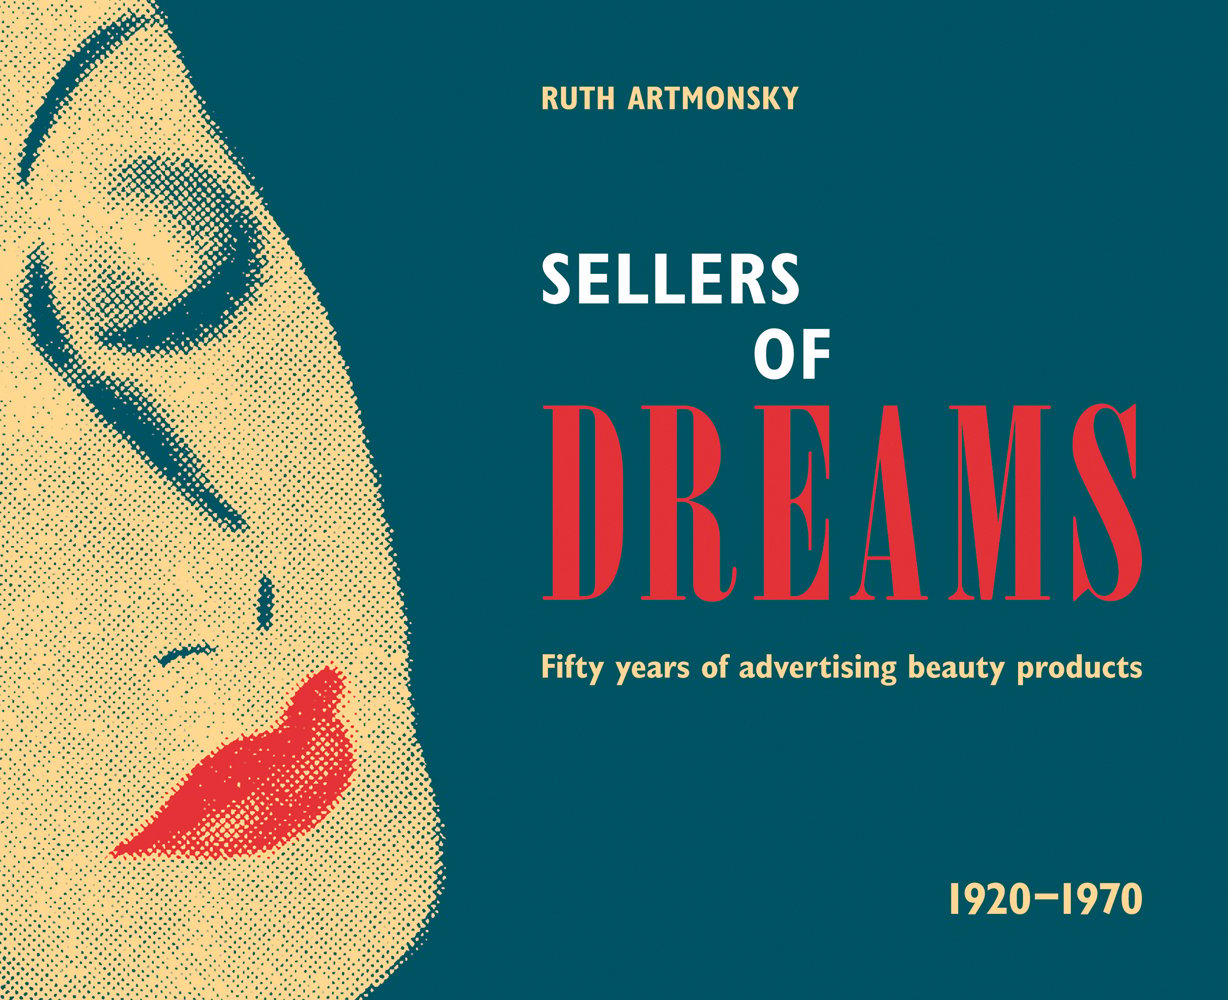 Beige female face, eye closed, red lipstick, on dark green cover, SELLERS OF DREAMS Fifty years of the advertising of beauty products 1920-1970 in white, red and cream font to right.